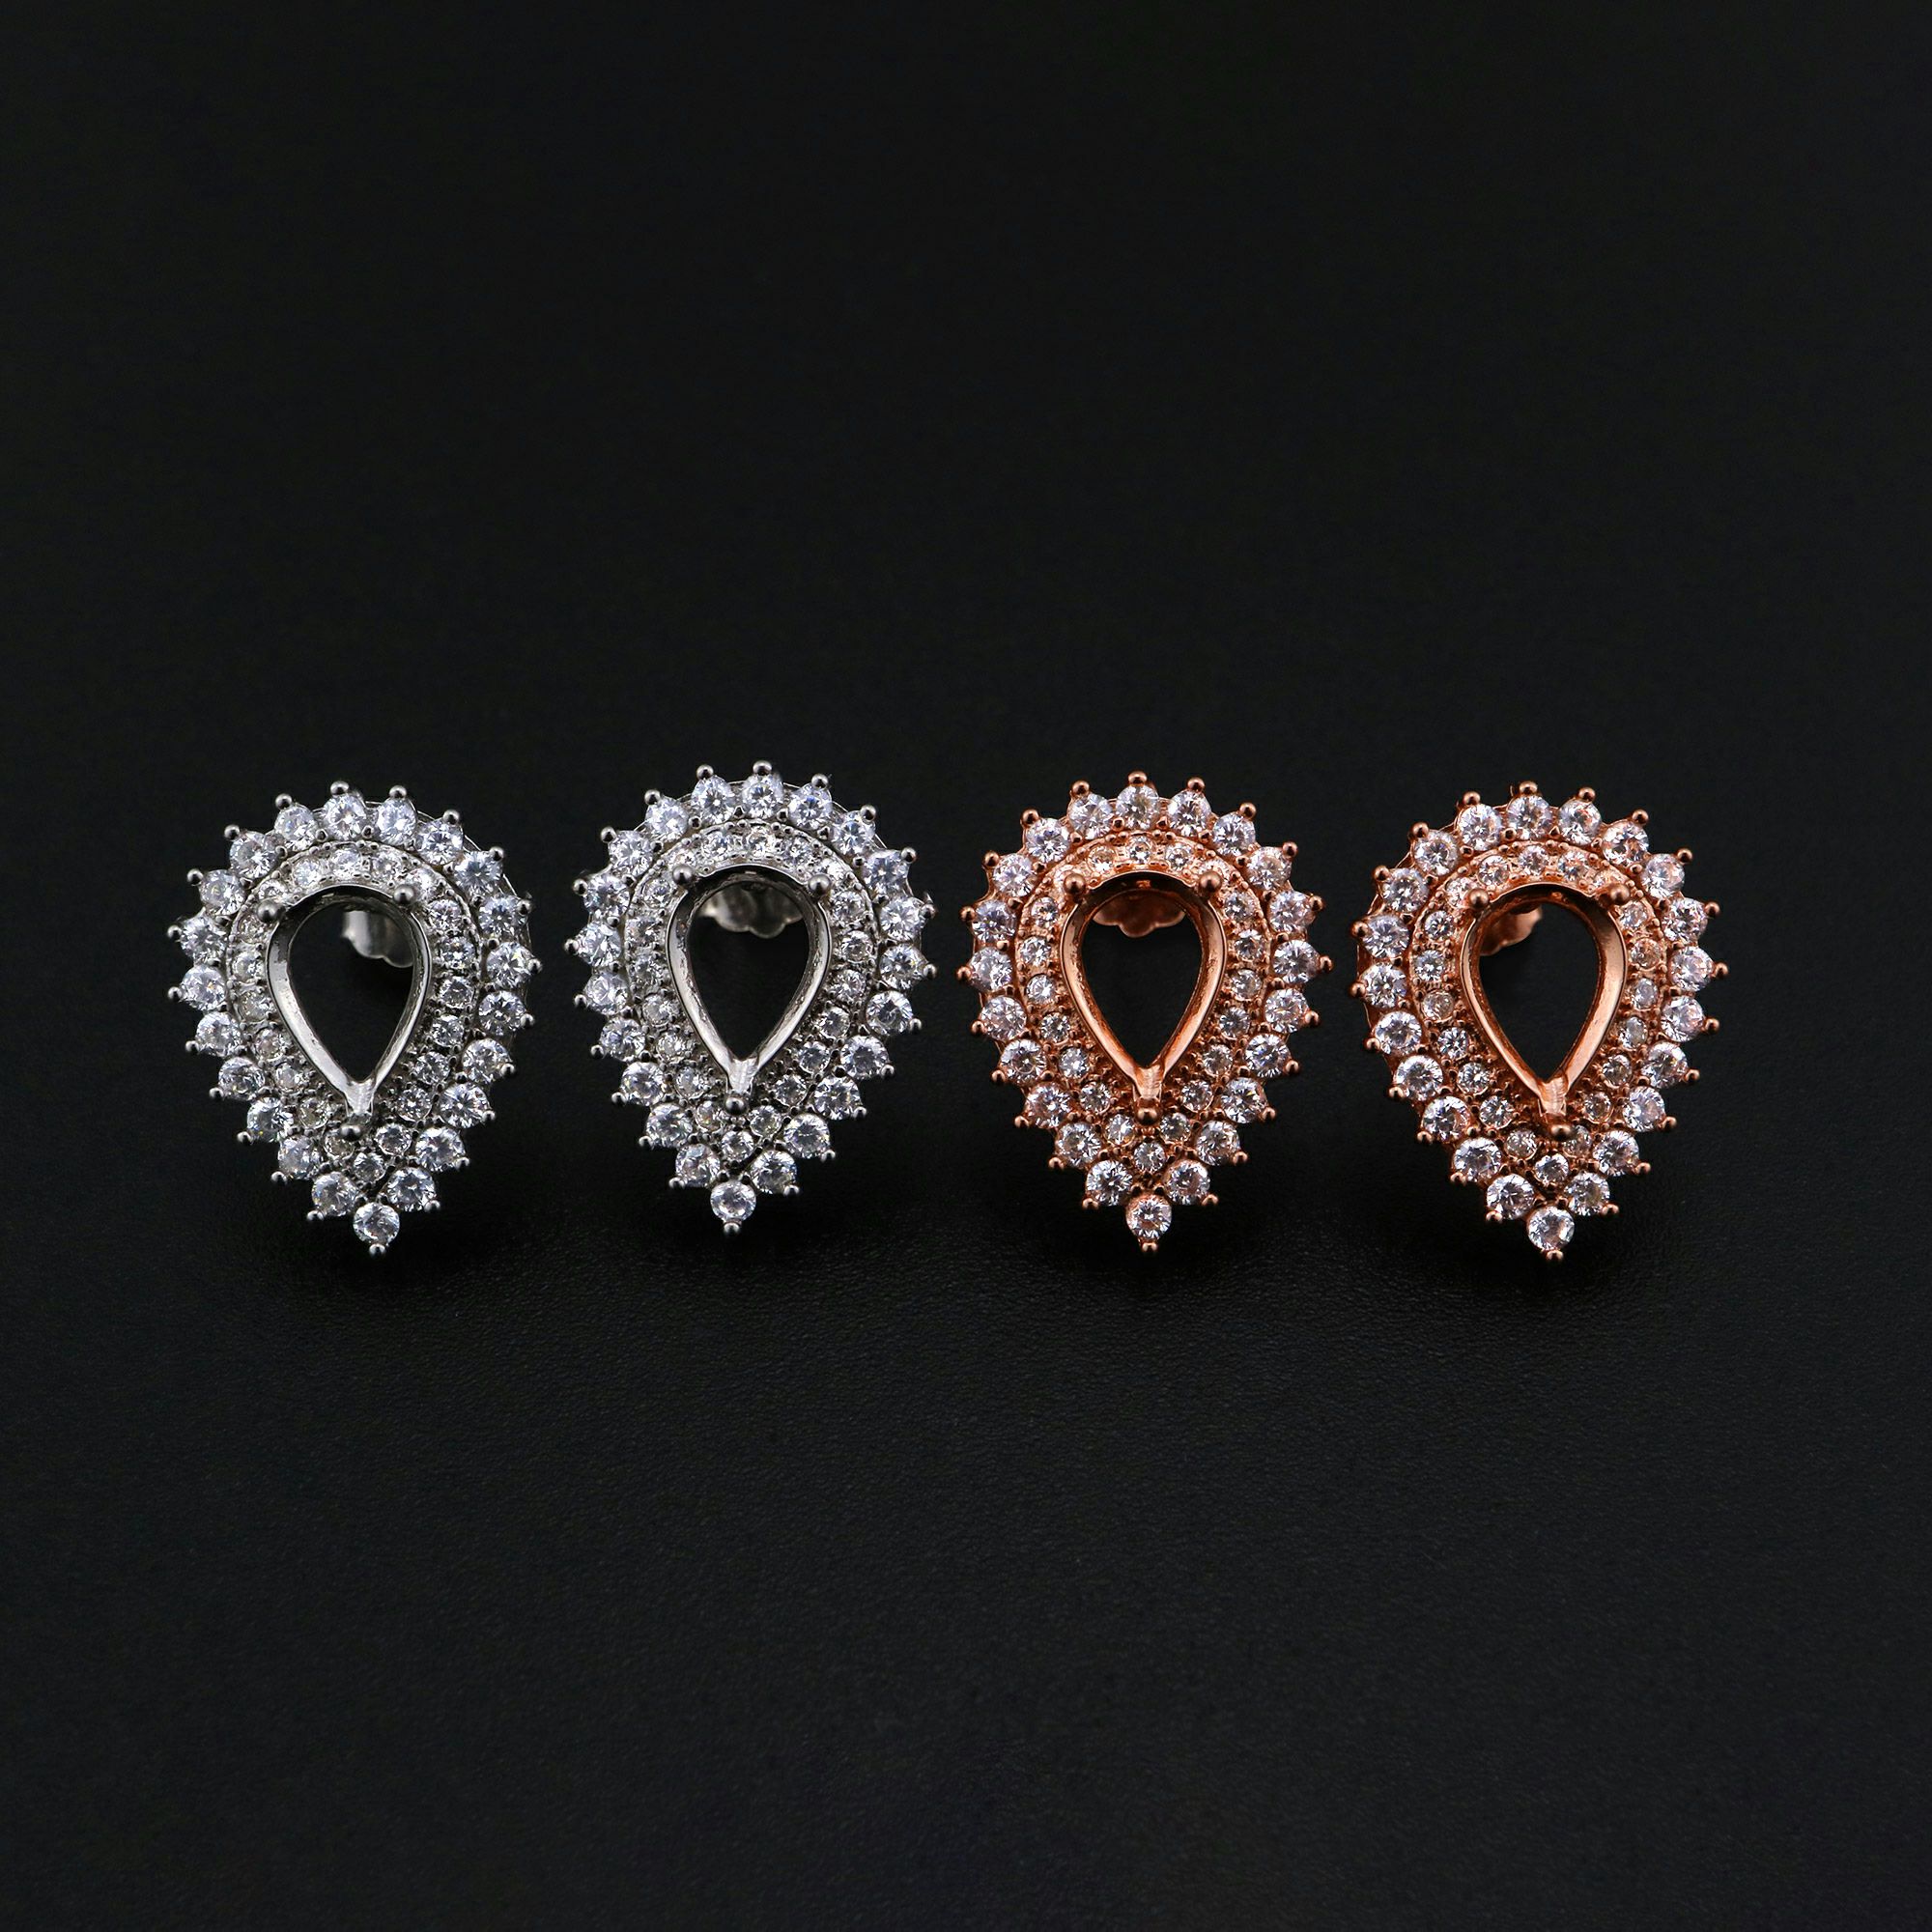 6x8MM Double Halo Pear Prong Studs Earrings Settings Solid 925 Sterling Silver Rose Gold Plated Earrings Bezel DIY Supplies 1706075 - Click Image to Close